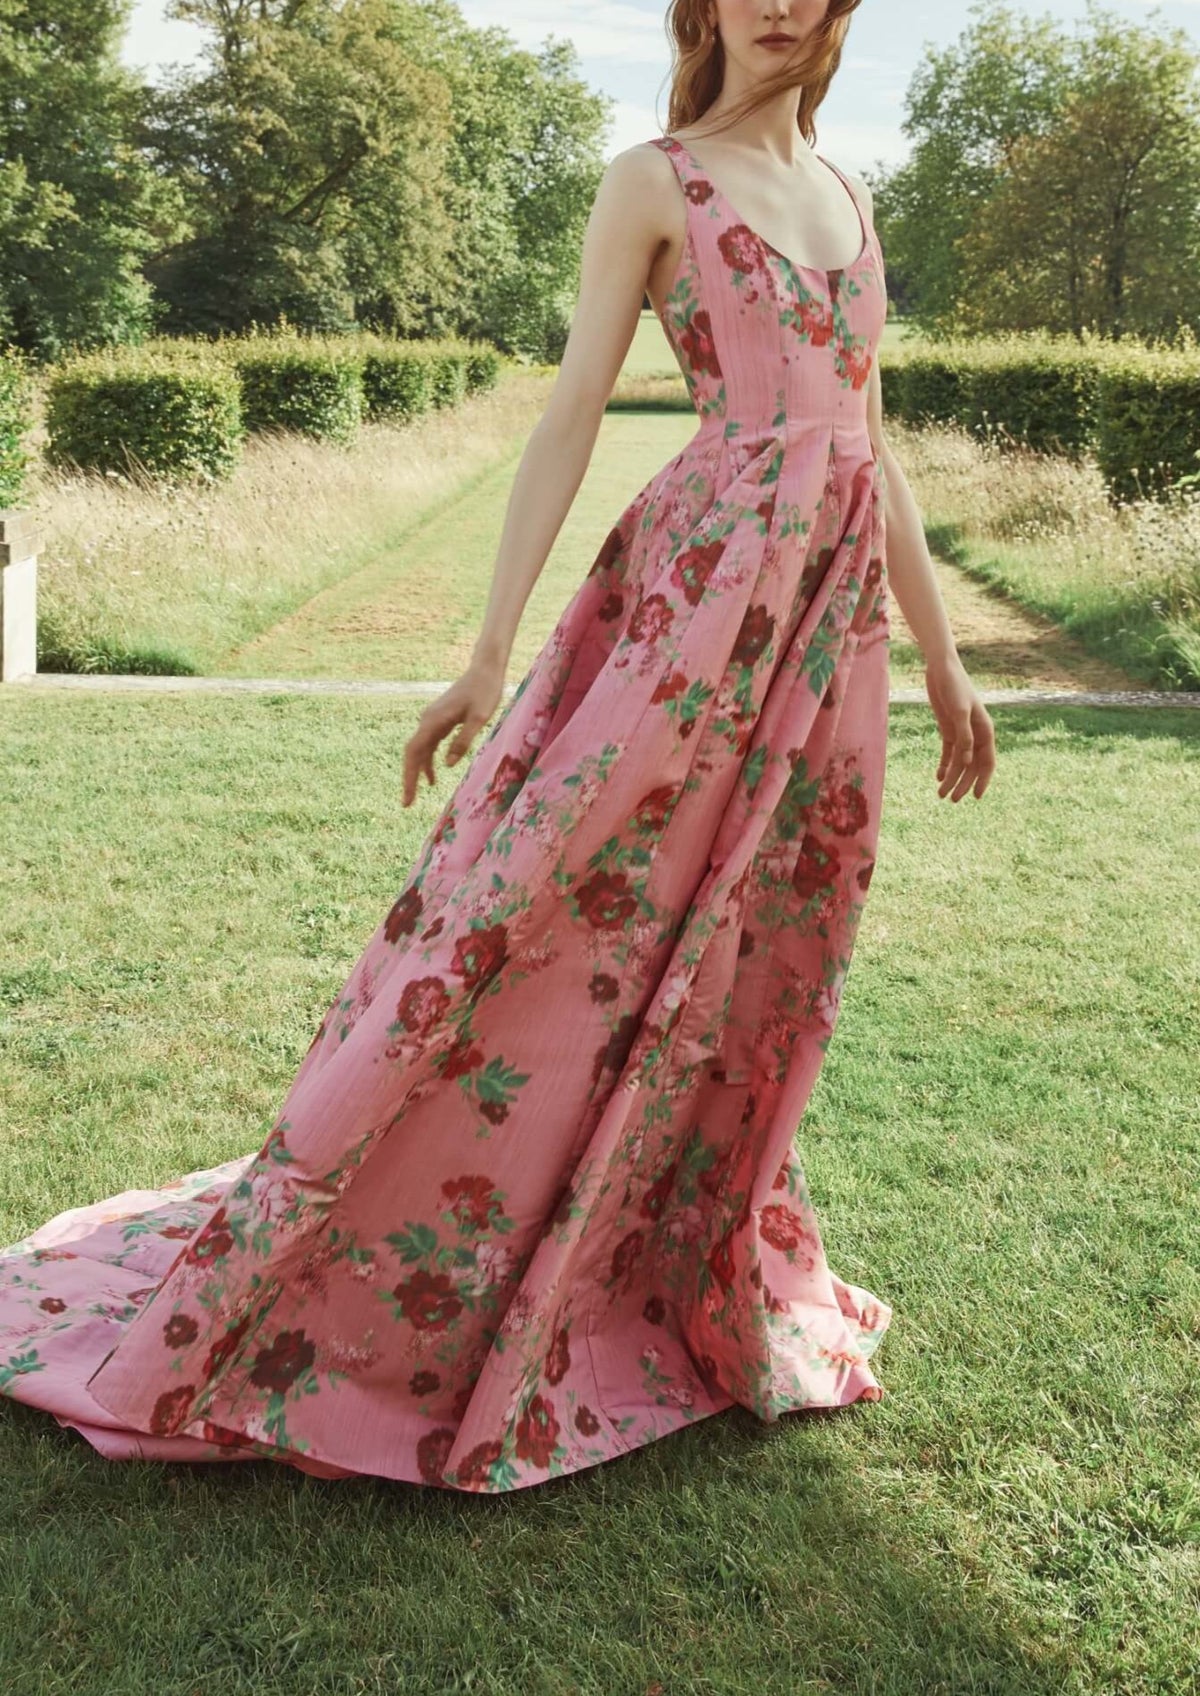 Botticelli Pink Floral Gown | Over The Moon